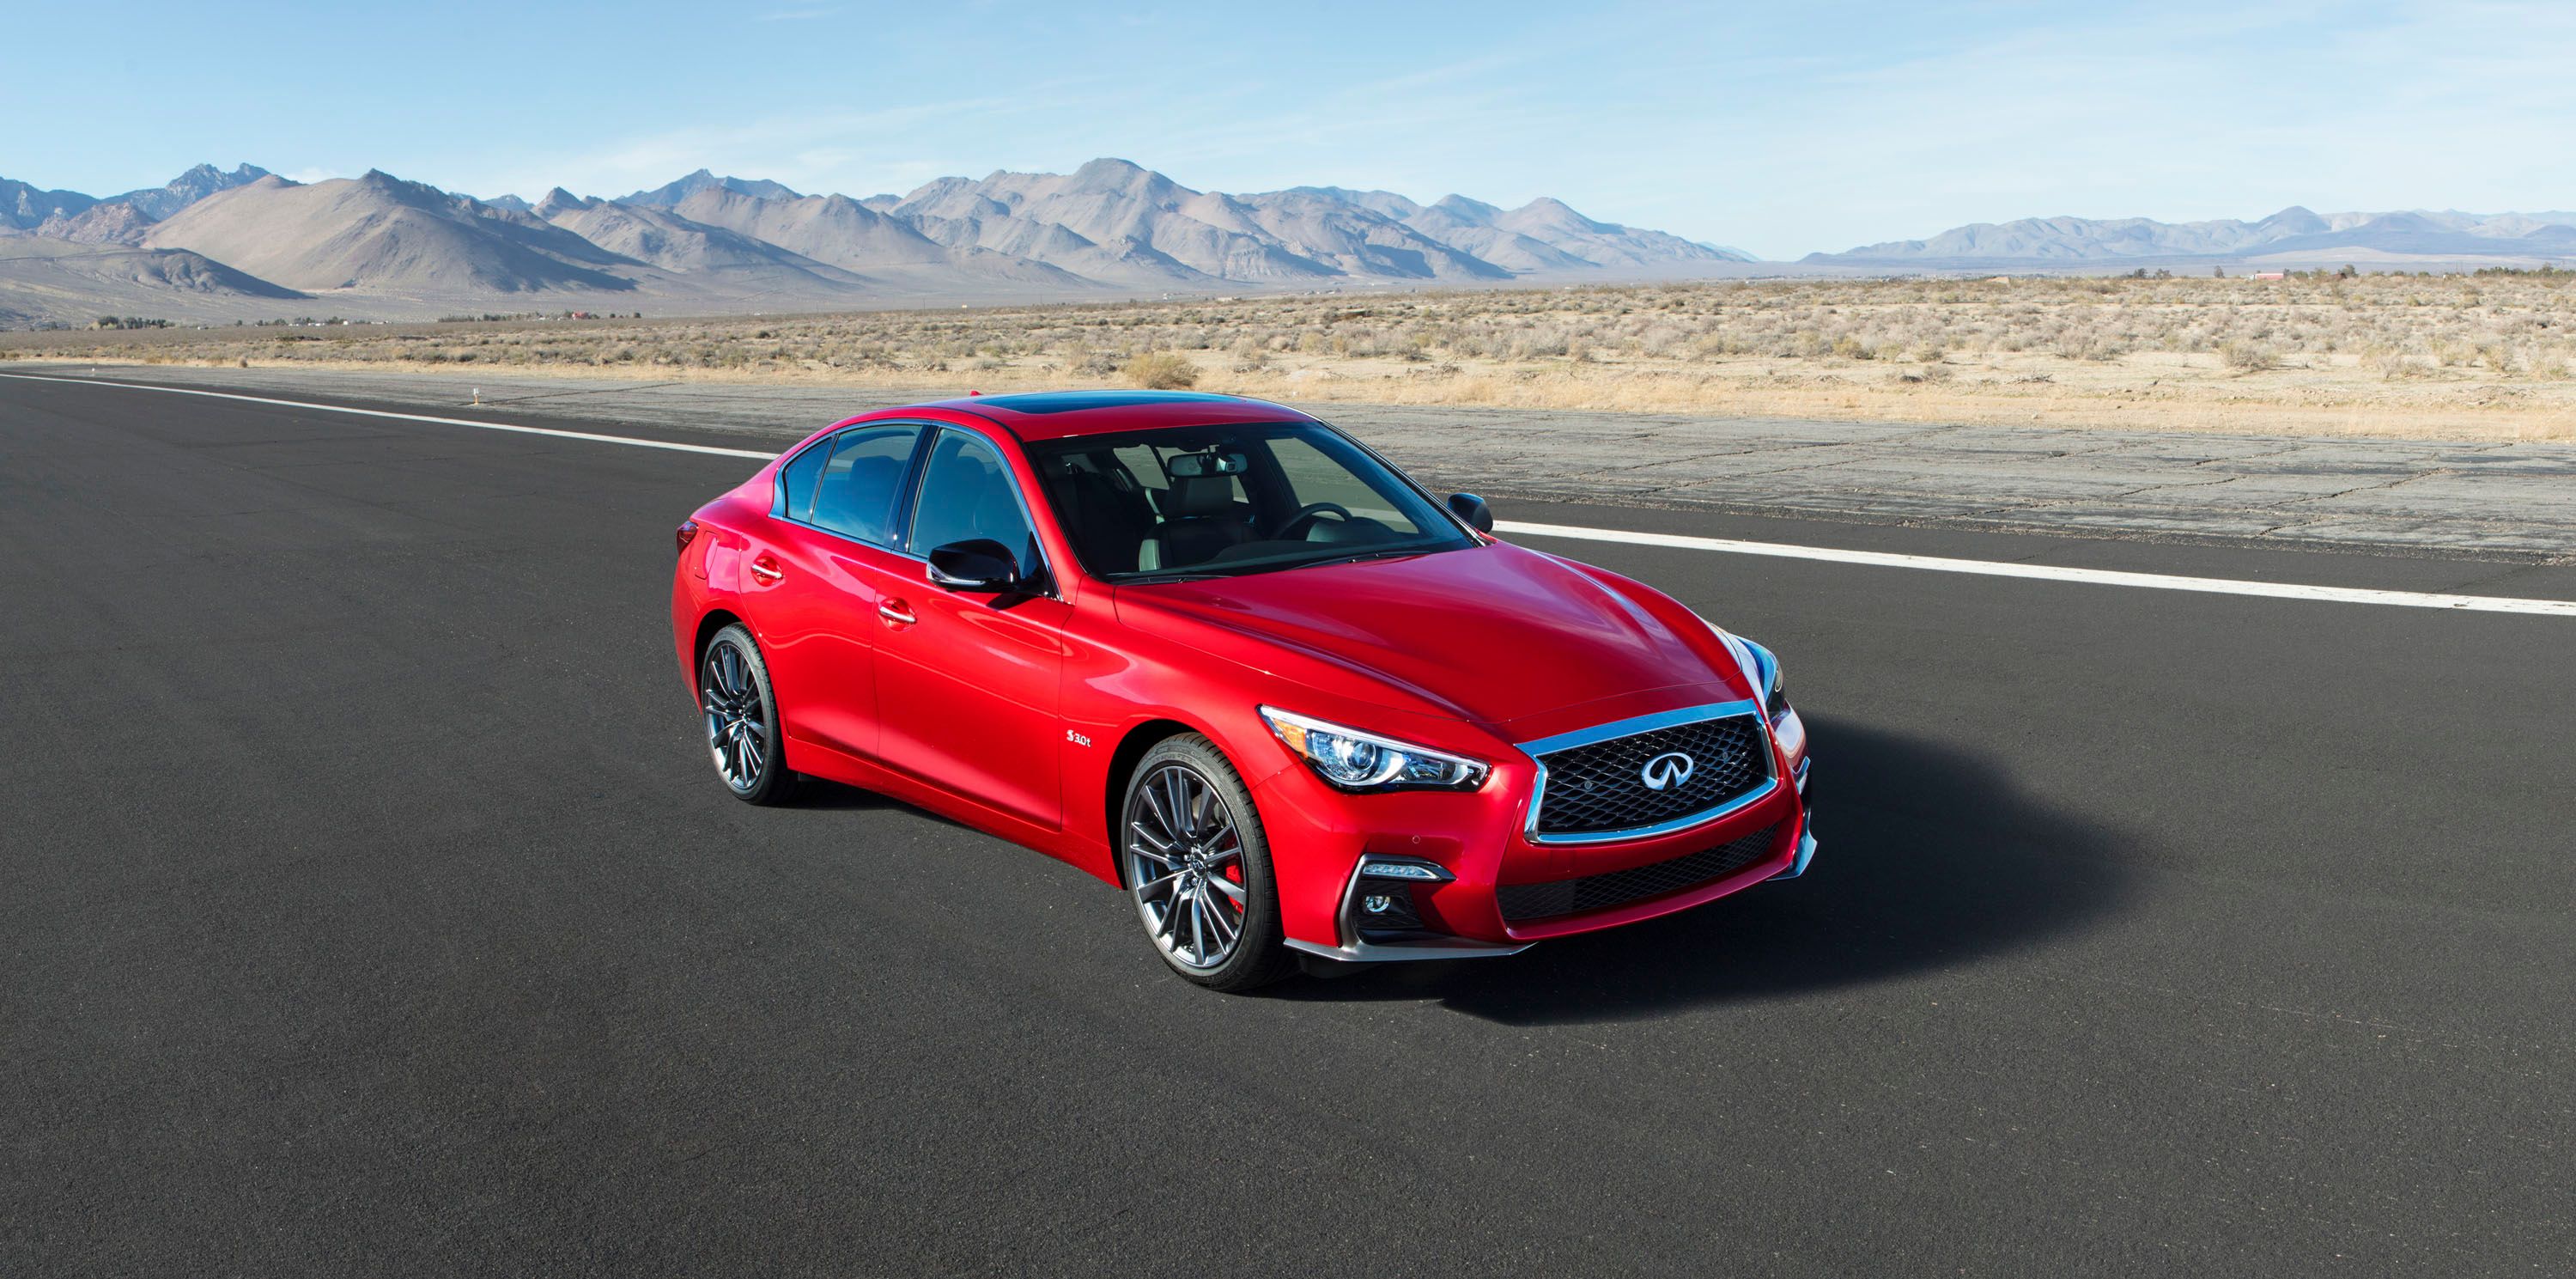 2018 Infiniti Q50, Q60, and Q70 to Ditch RWD Platform for Hybrid AWD Architecture Starting in 2021